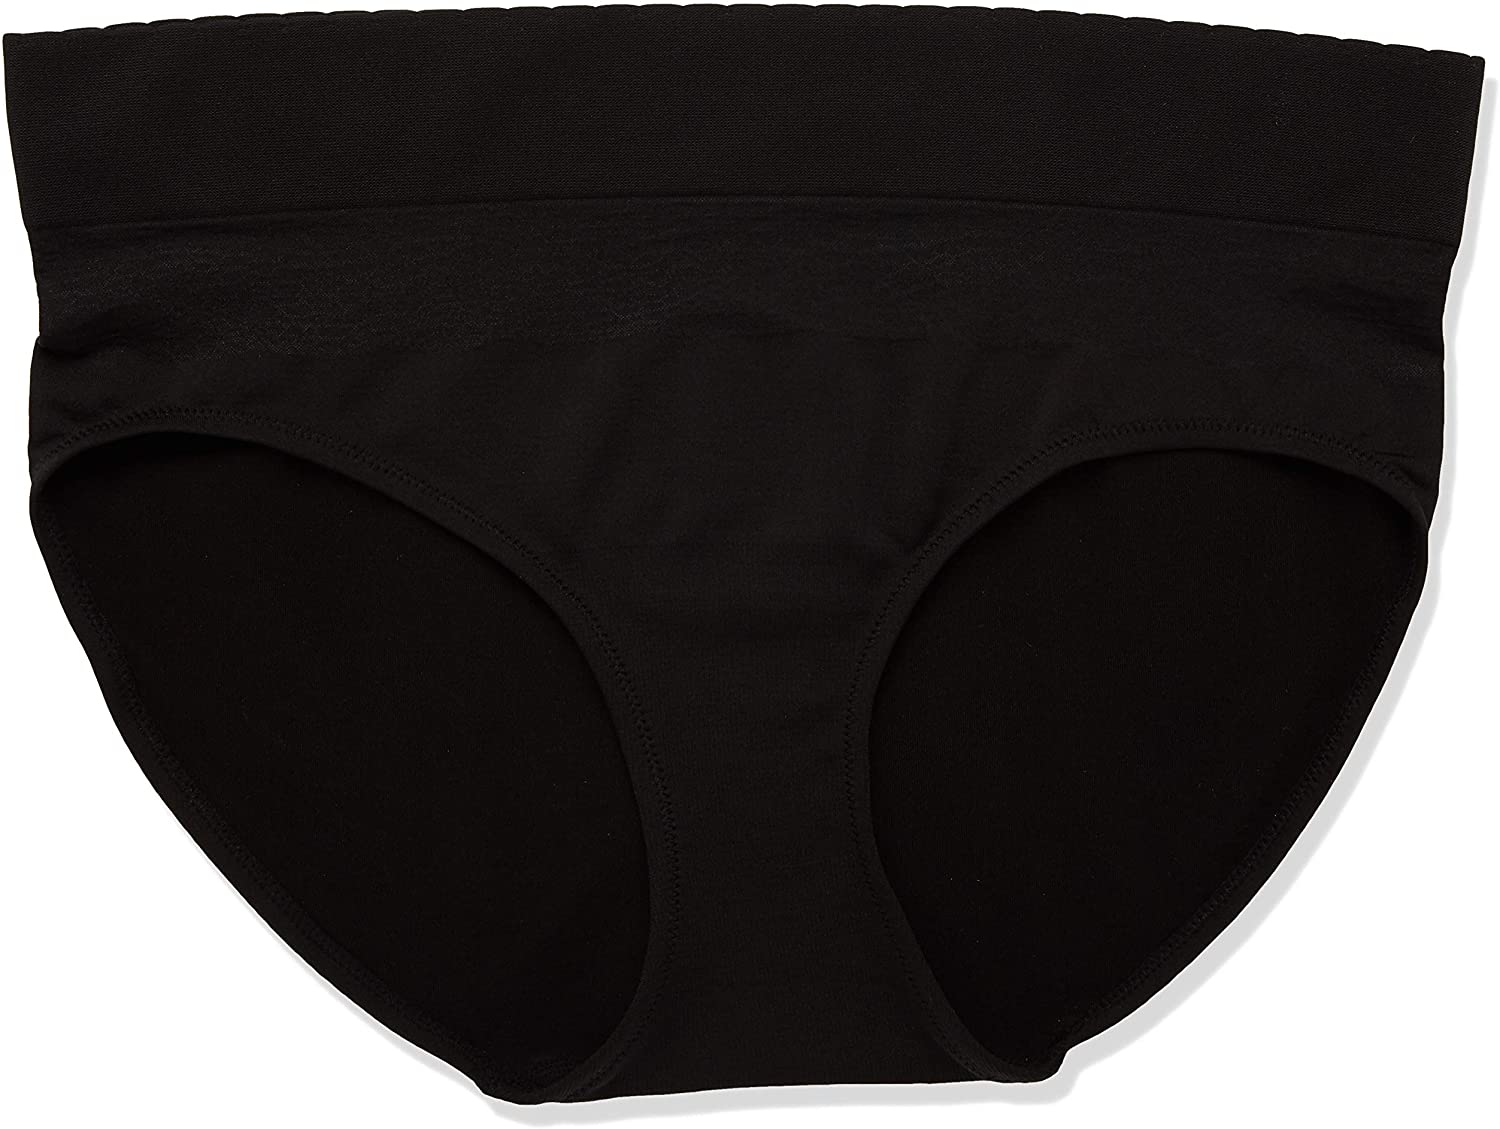 Price:$5.00 Warner's Women's Plus Size Cloud 9 Seamless Hipster Panty at Amazon Women’s Clothing store